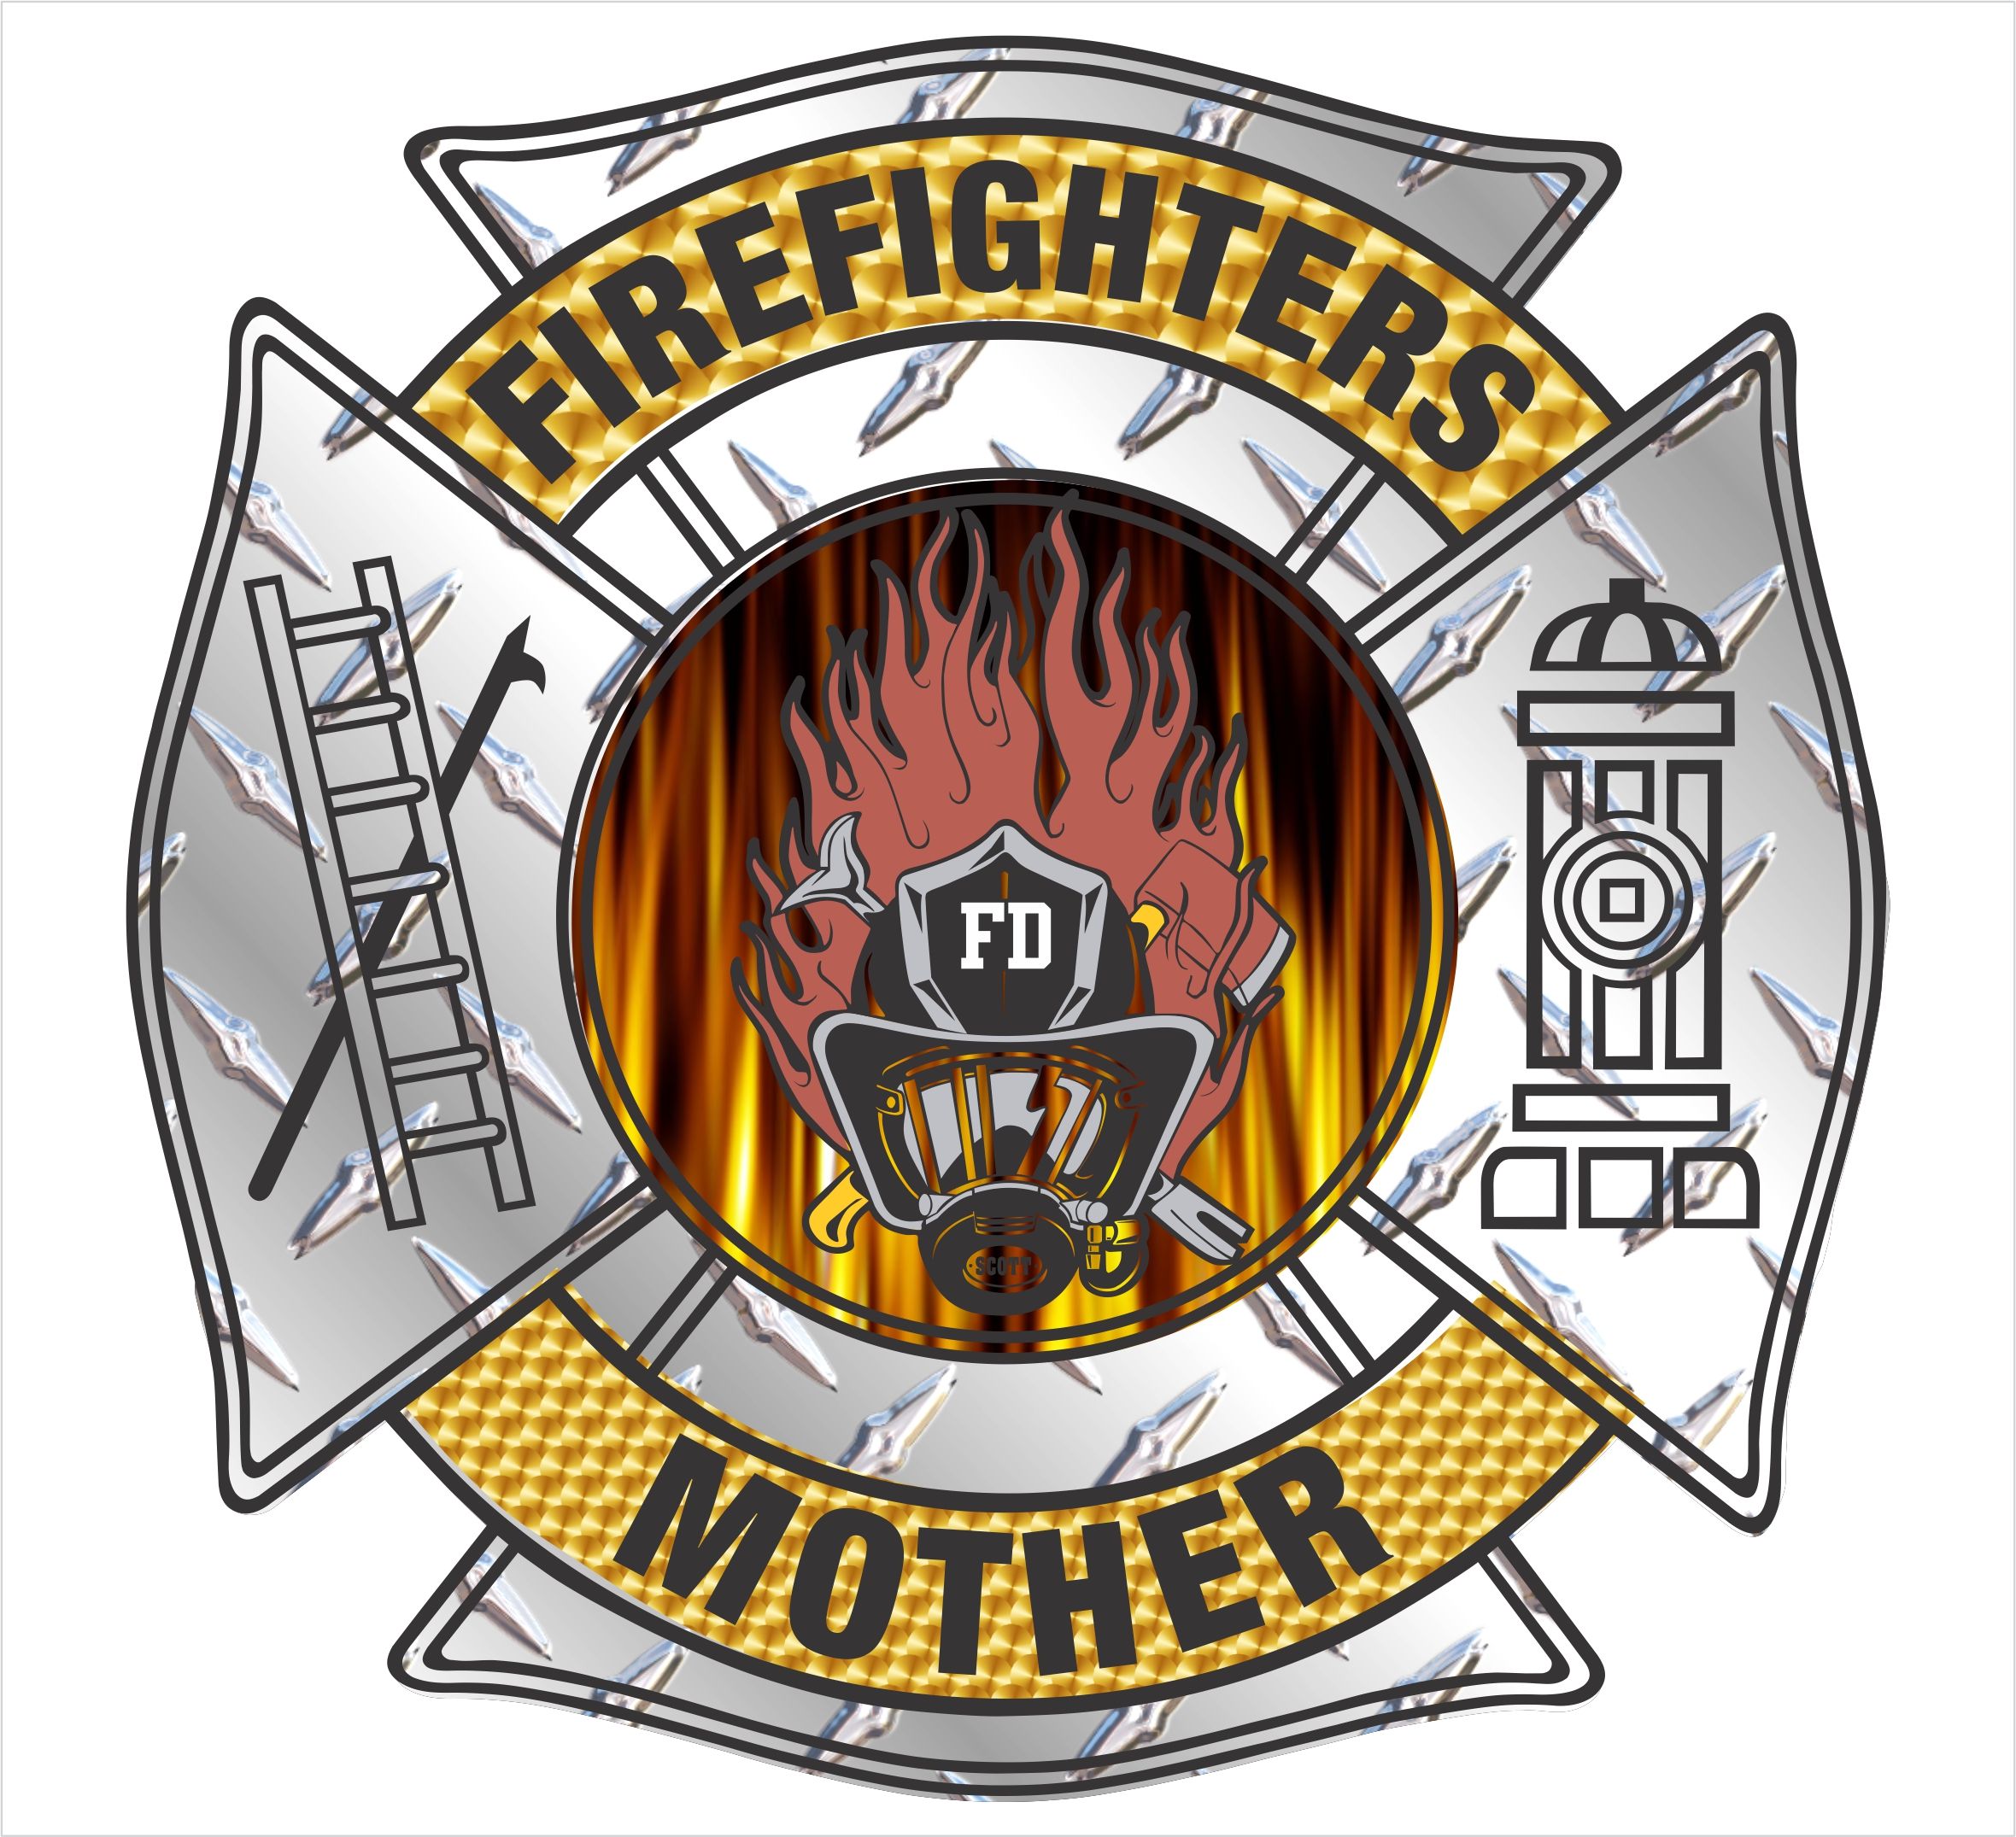 Firefighters Mother FF DP Style Maltese - Powercall Sirens LLC